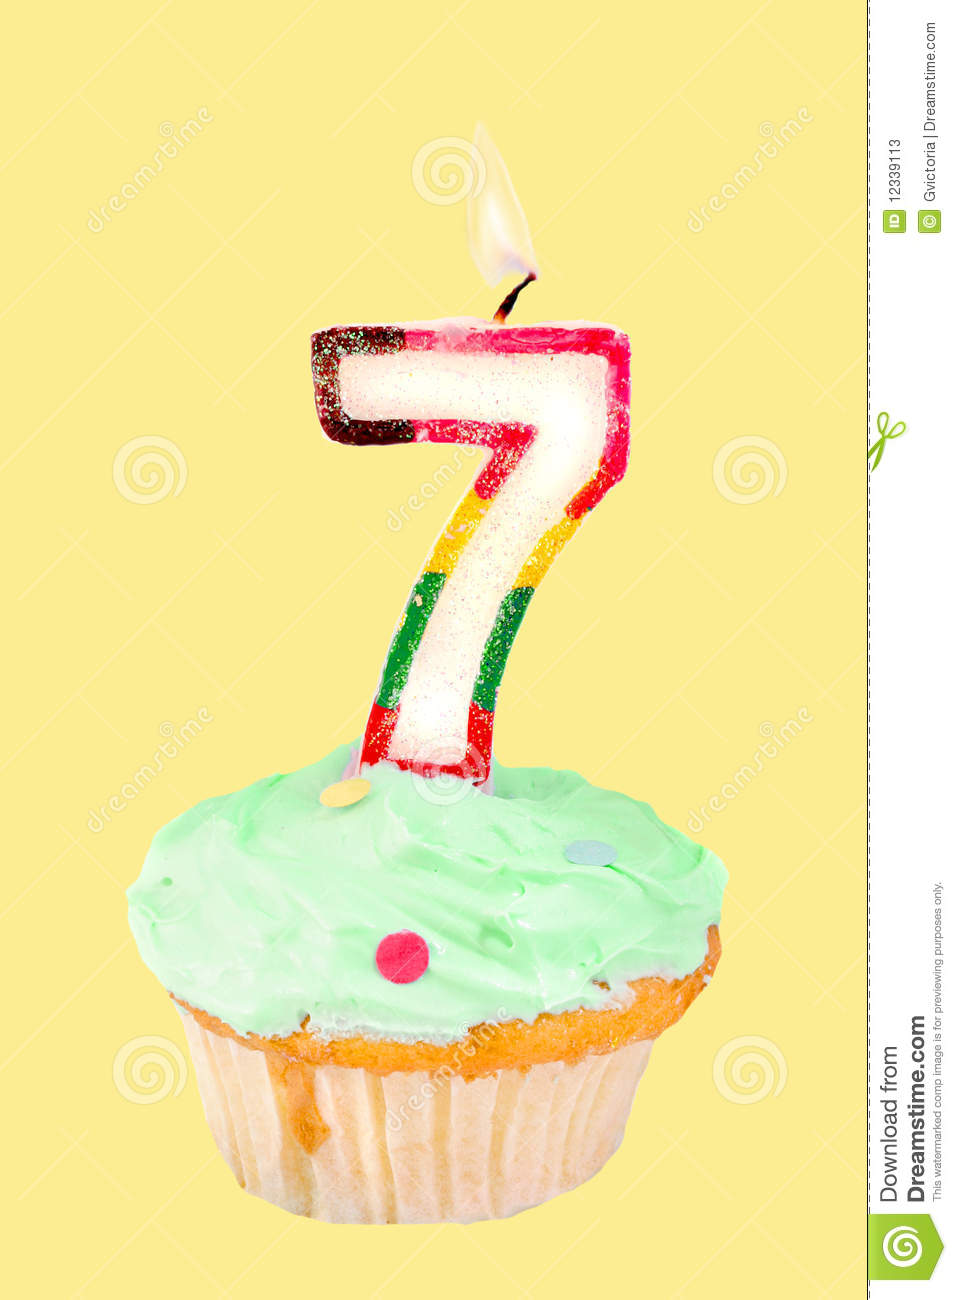 Seventh Birthday Cupcake With Green Frosting On A Yellow Background